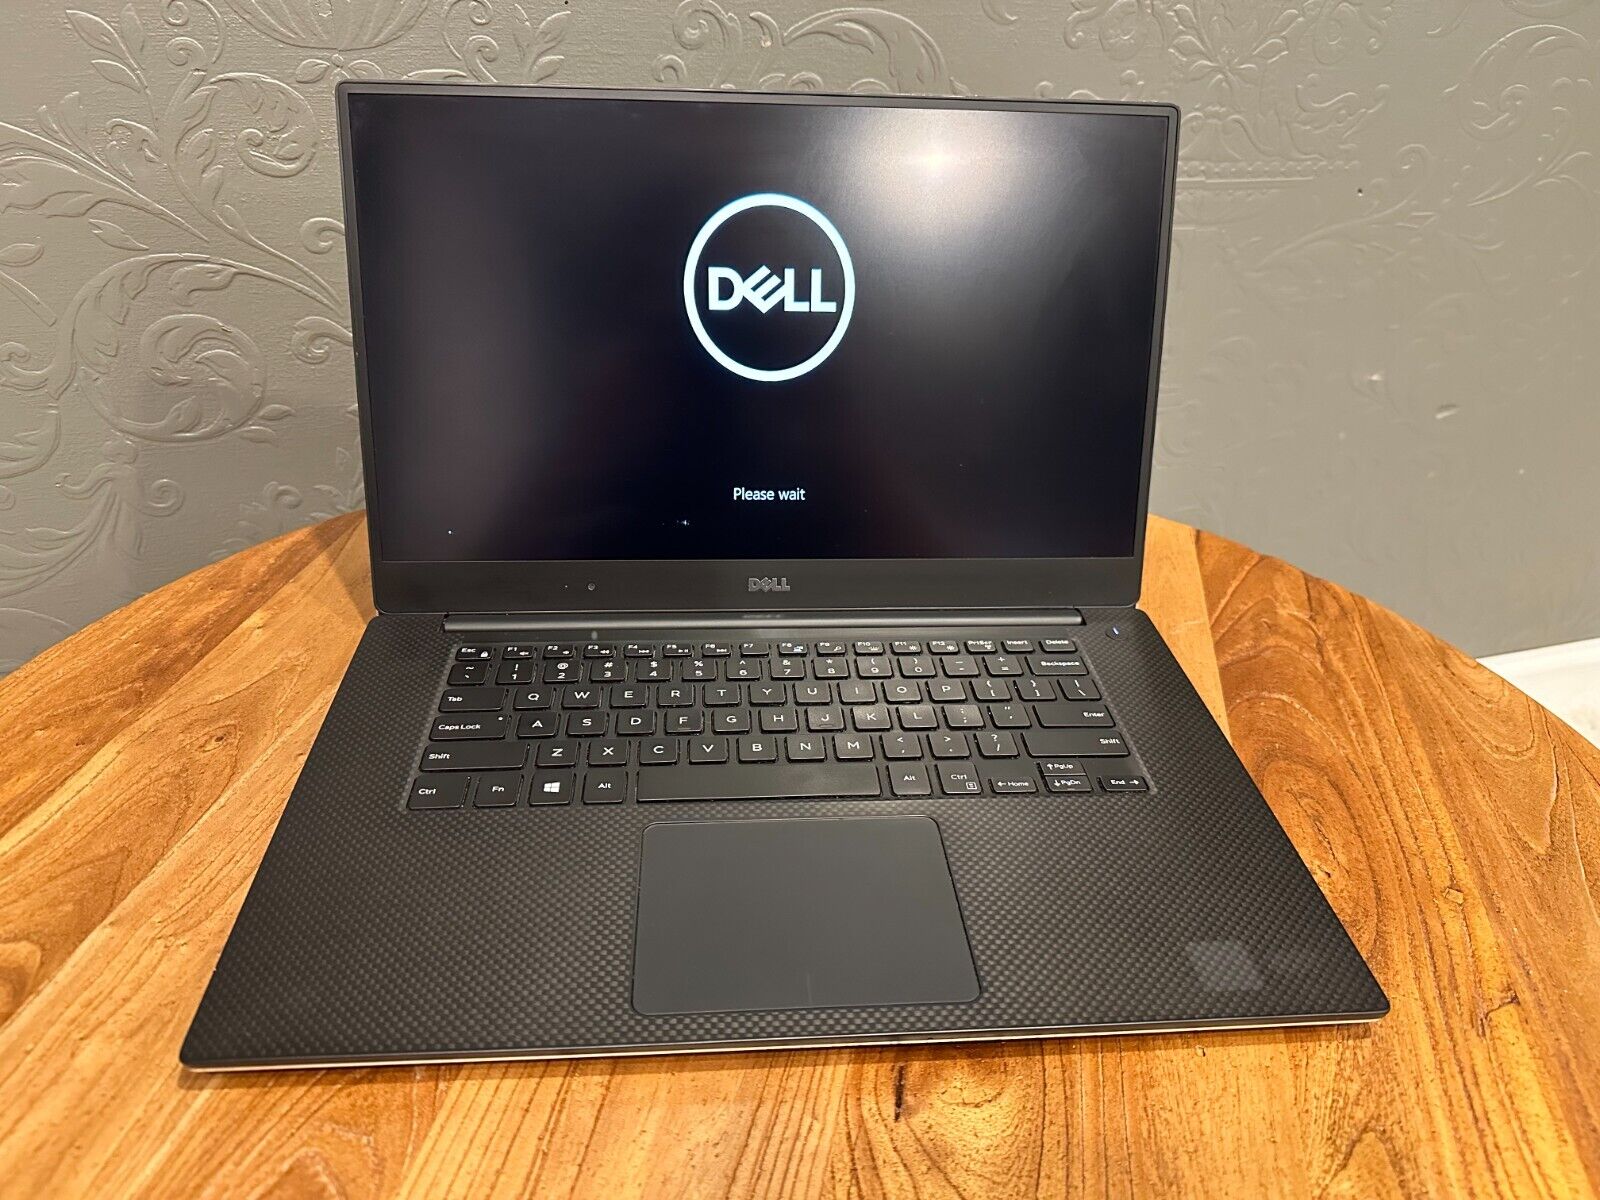 Dell XPS 15 9560 - Silver - 16GB RAM - 238GB SSD - Used